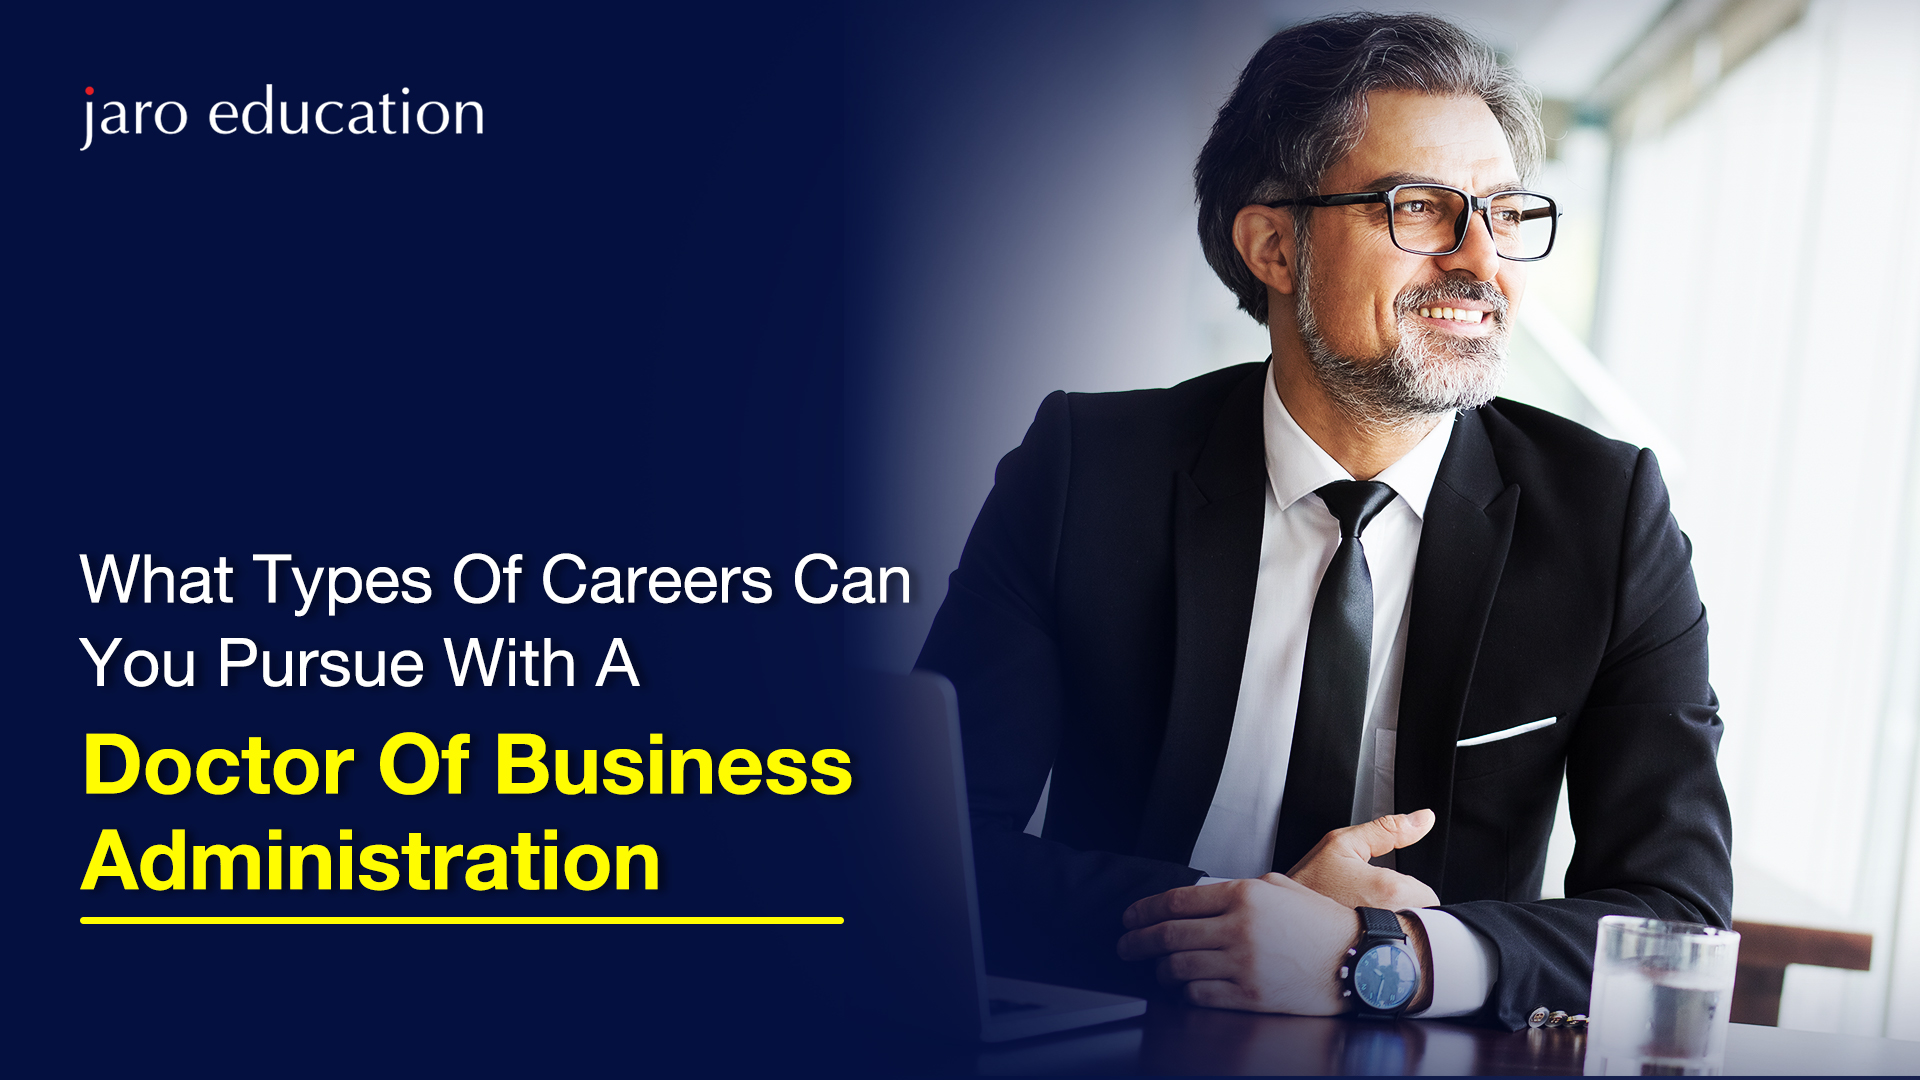 phd in business administration in usa